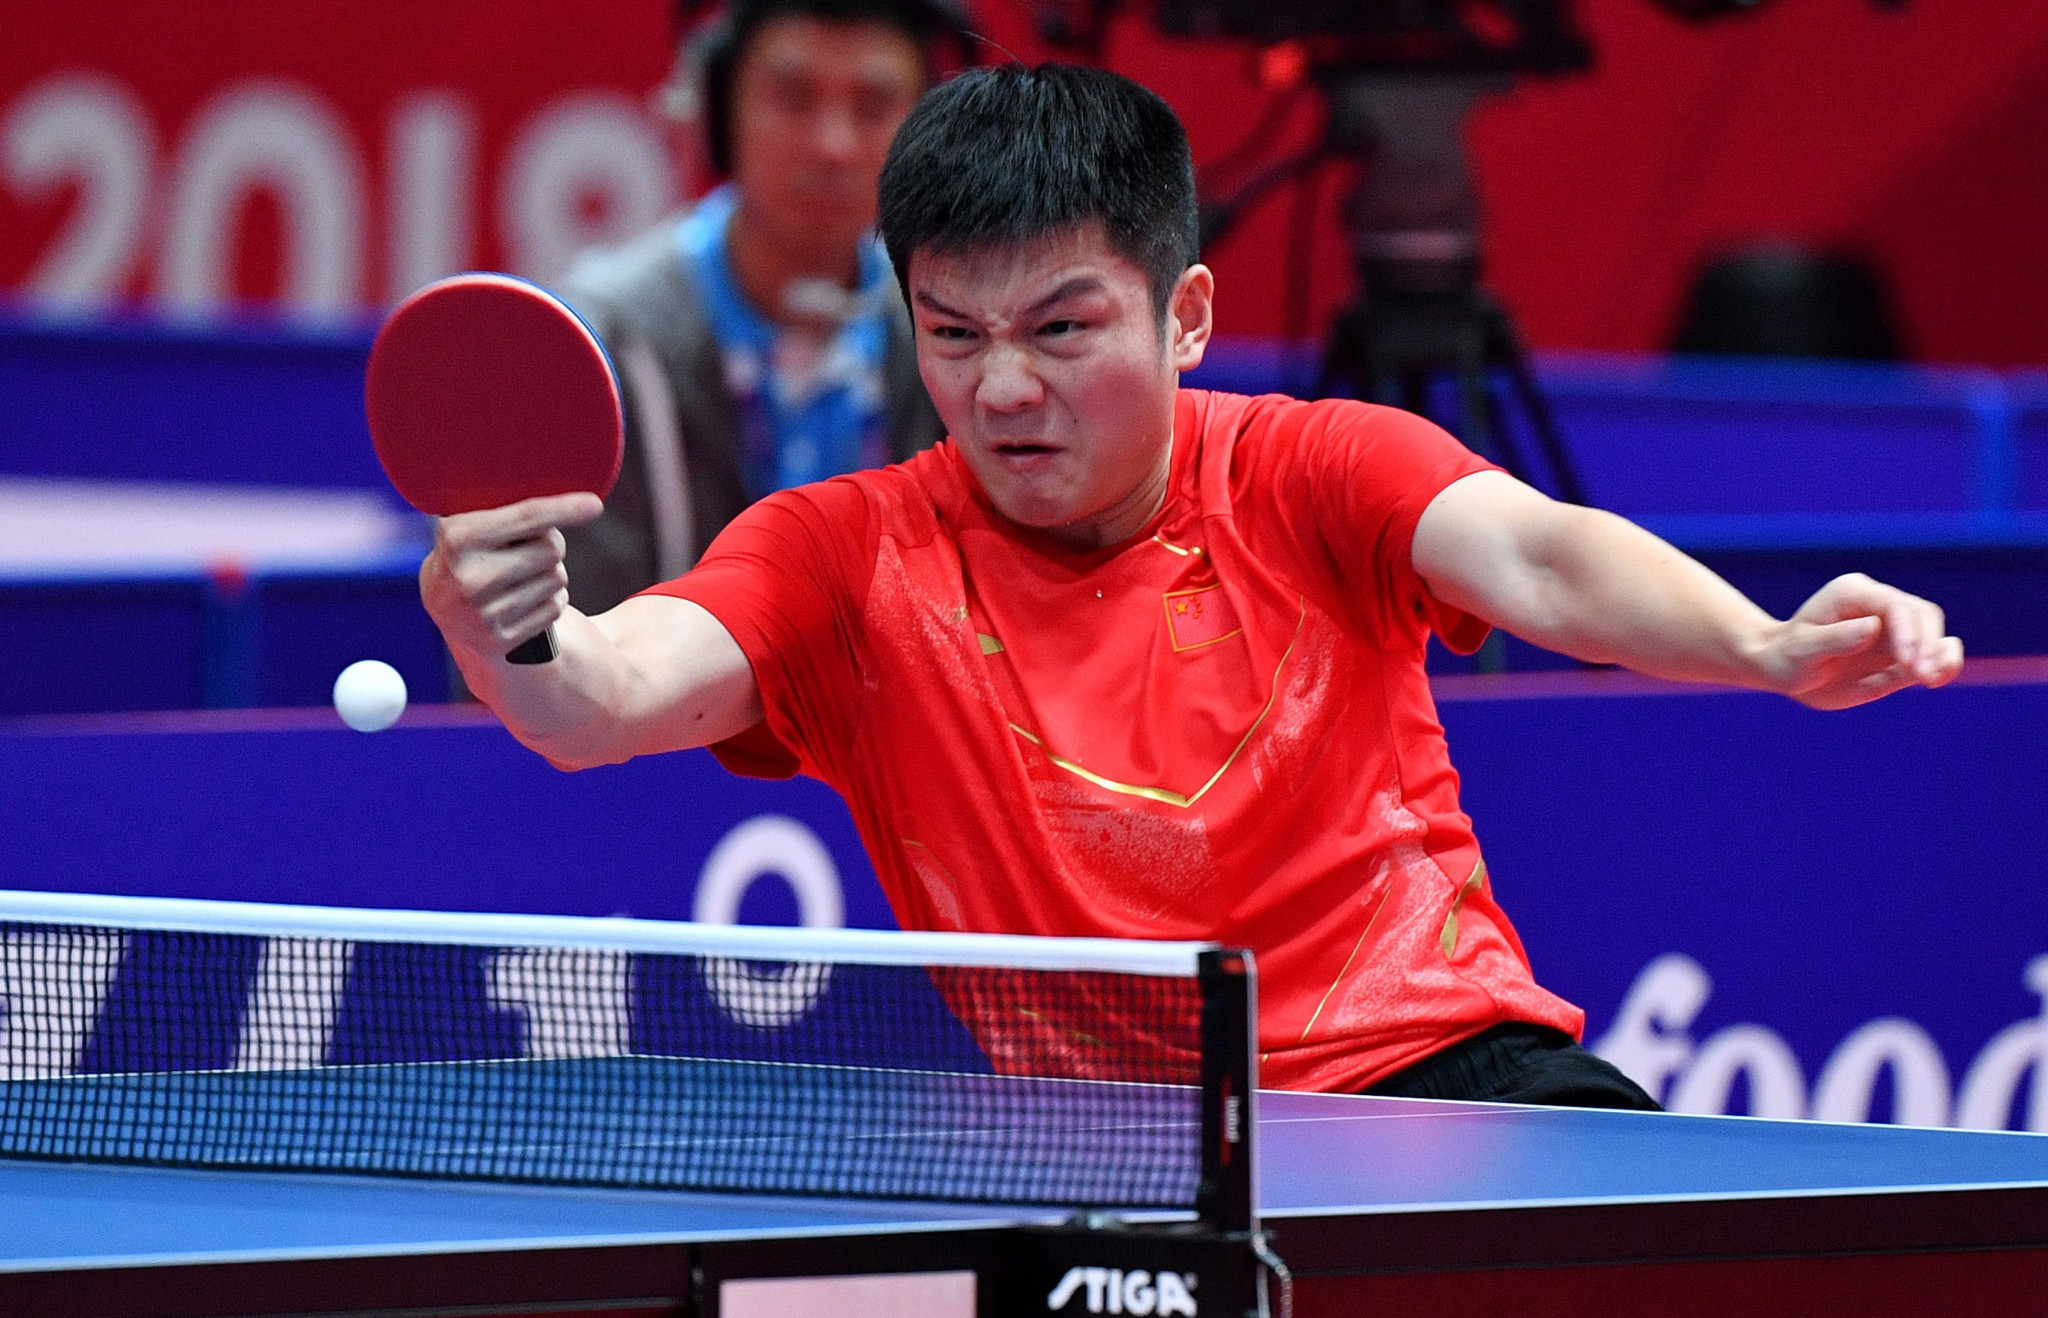 China completed a double success in the table tennis team events by overcoming South Korea 3-0 in the men's final ©Getty Images